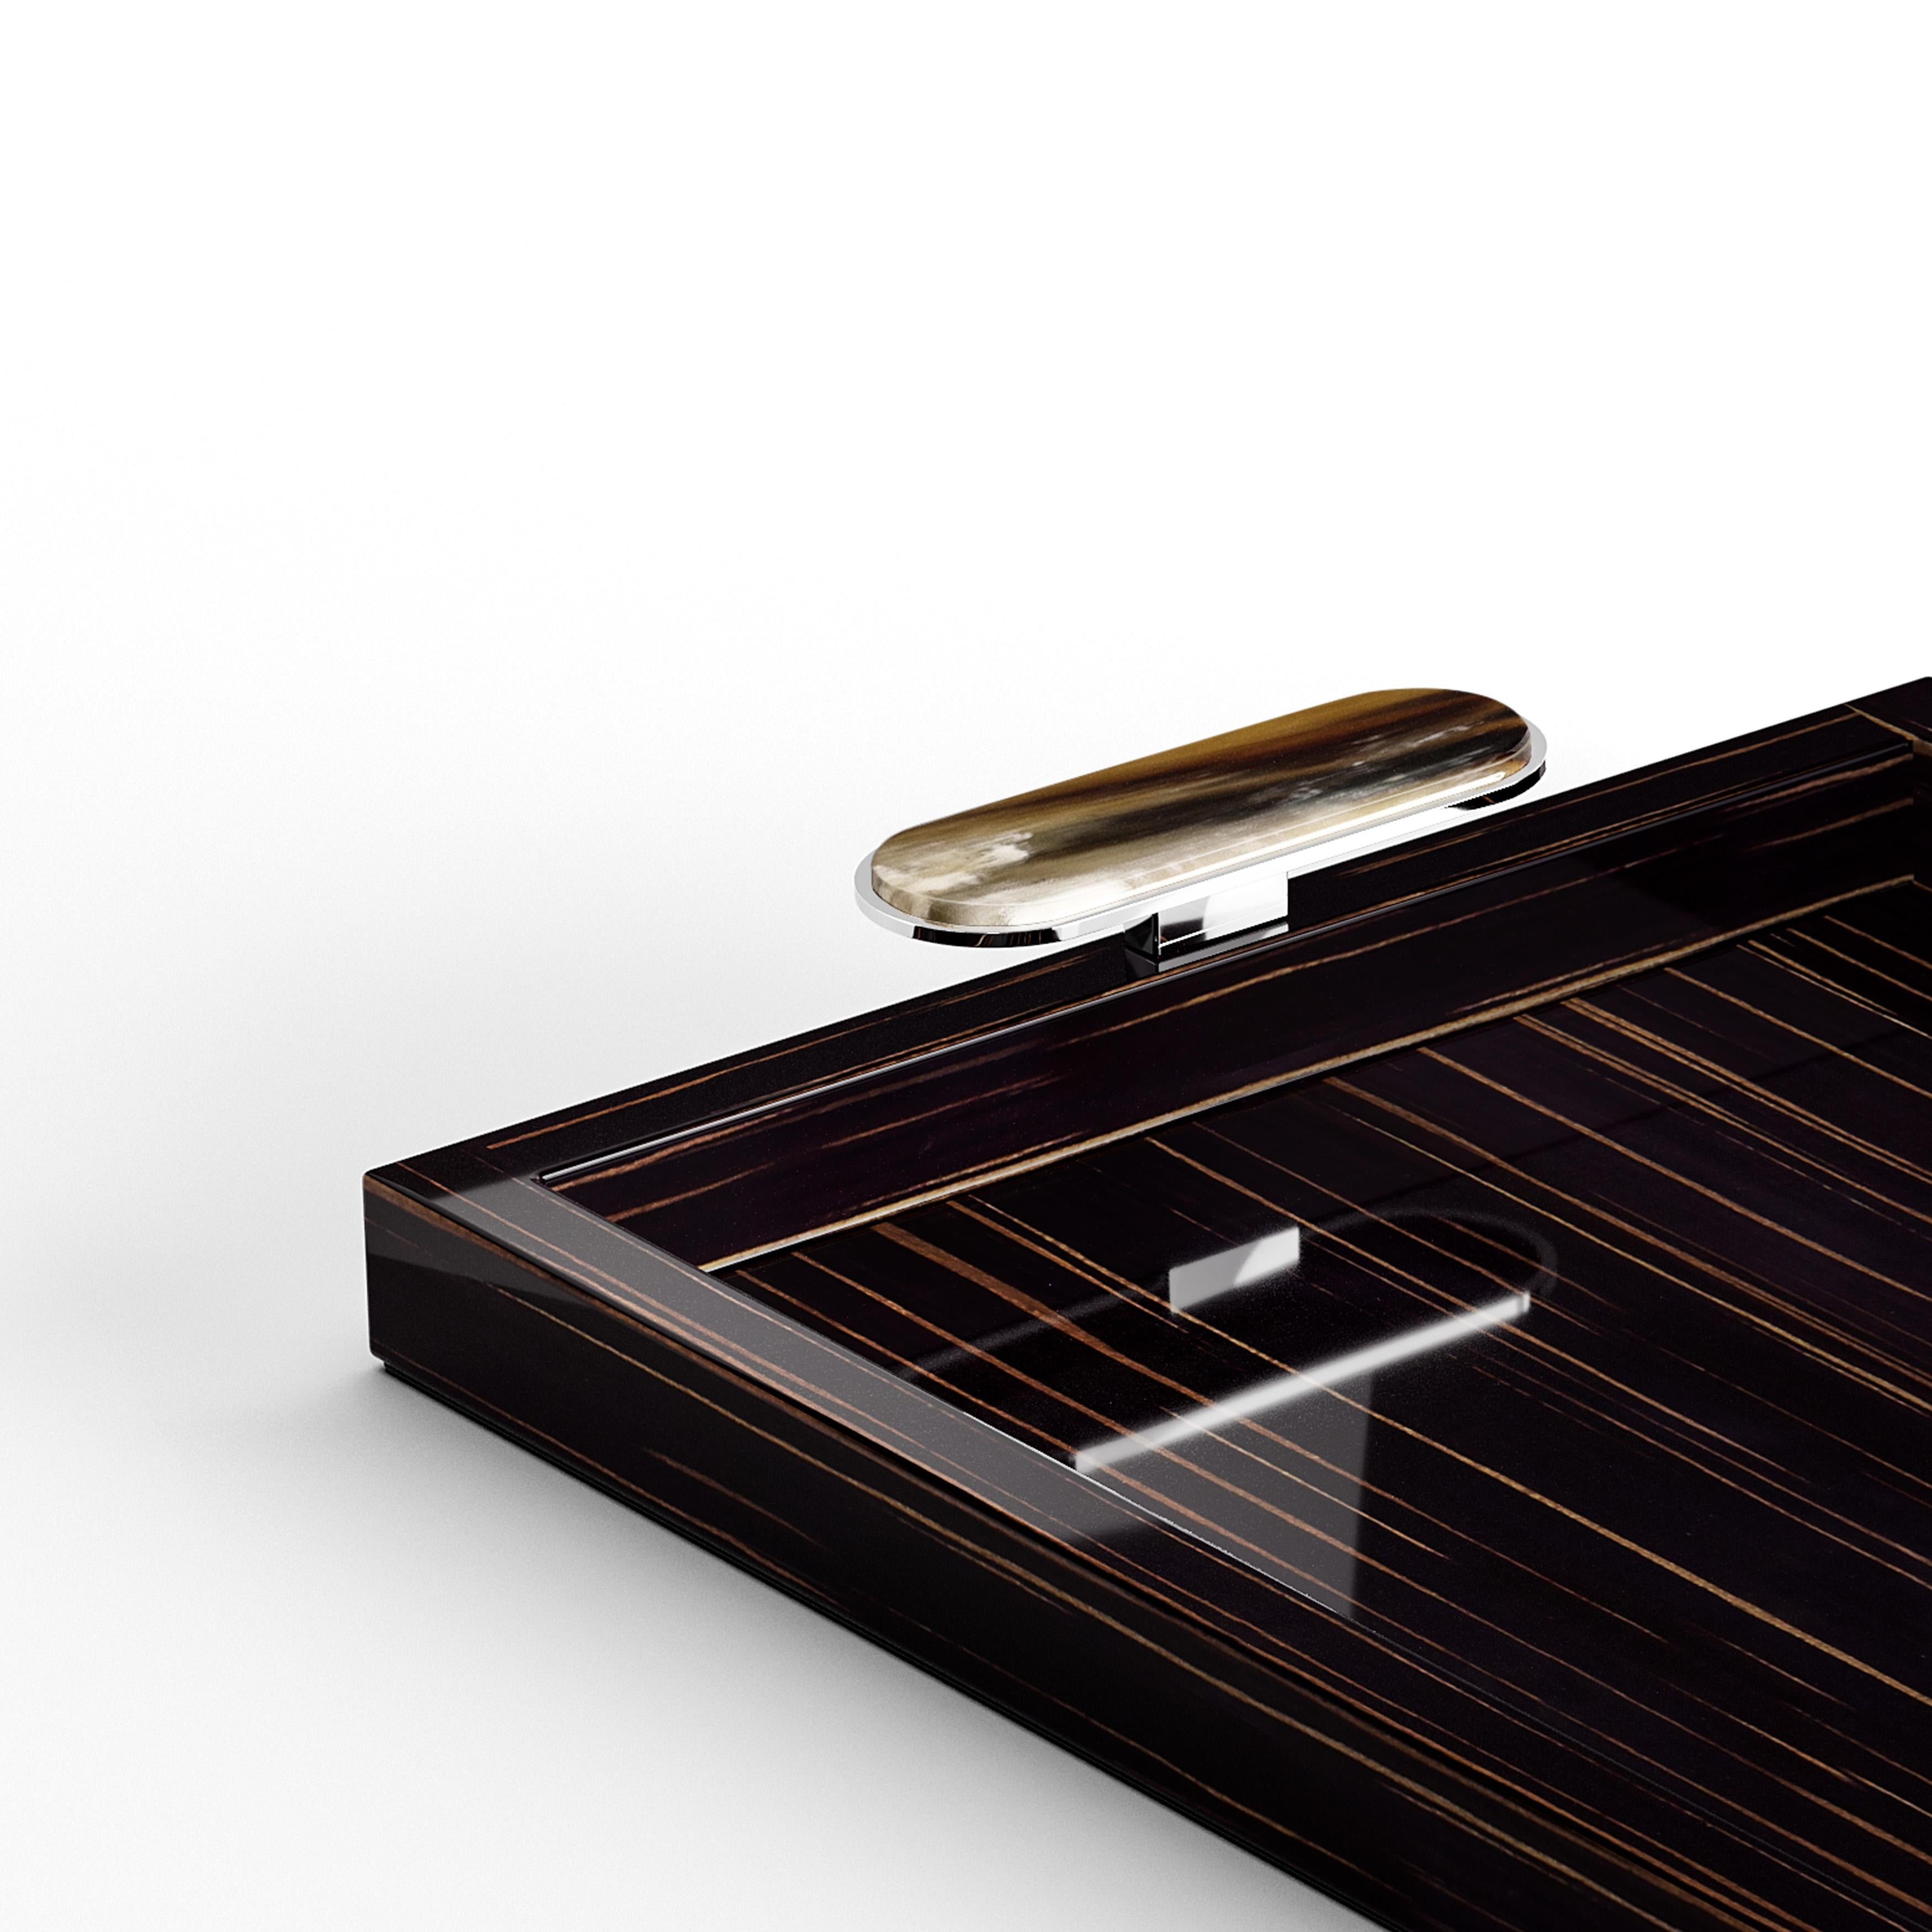 Elegant and functional, the Berro tray is ideal for serving delicacies and beverages in style. Its structure is handcrafted in glossy ebony and sports elegant handles in Corno Italiano and chromed brass. The natural tones of Corno Italiano, paired